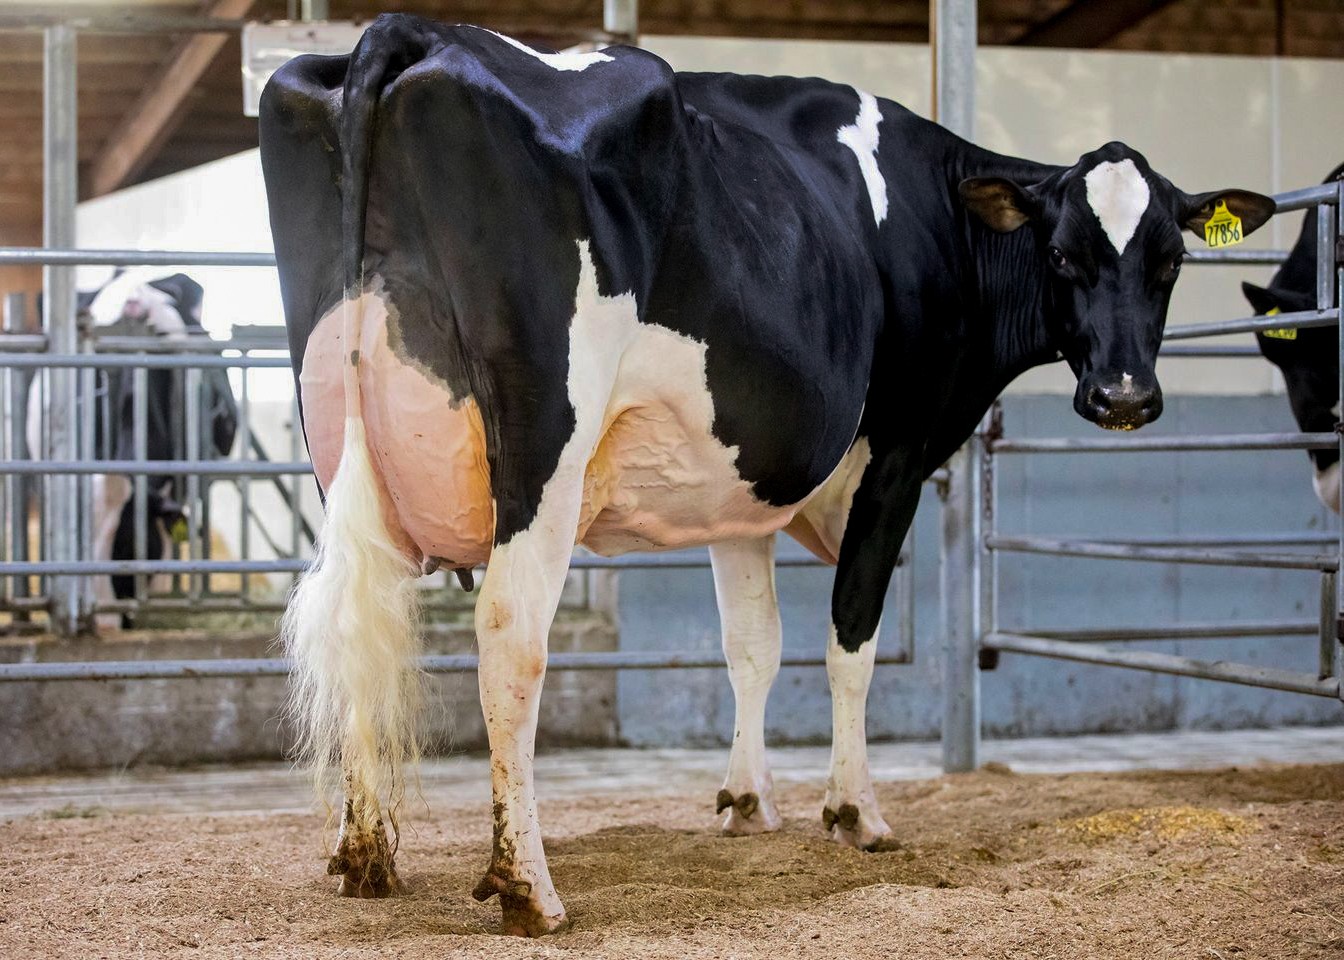 Paris - mother Orono (global cow of the year)